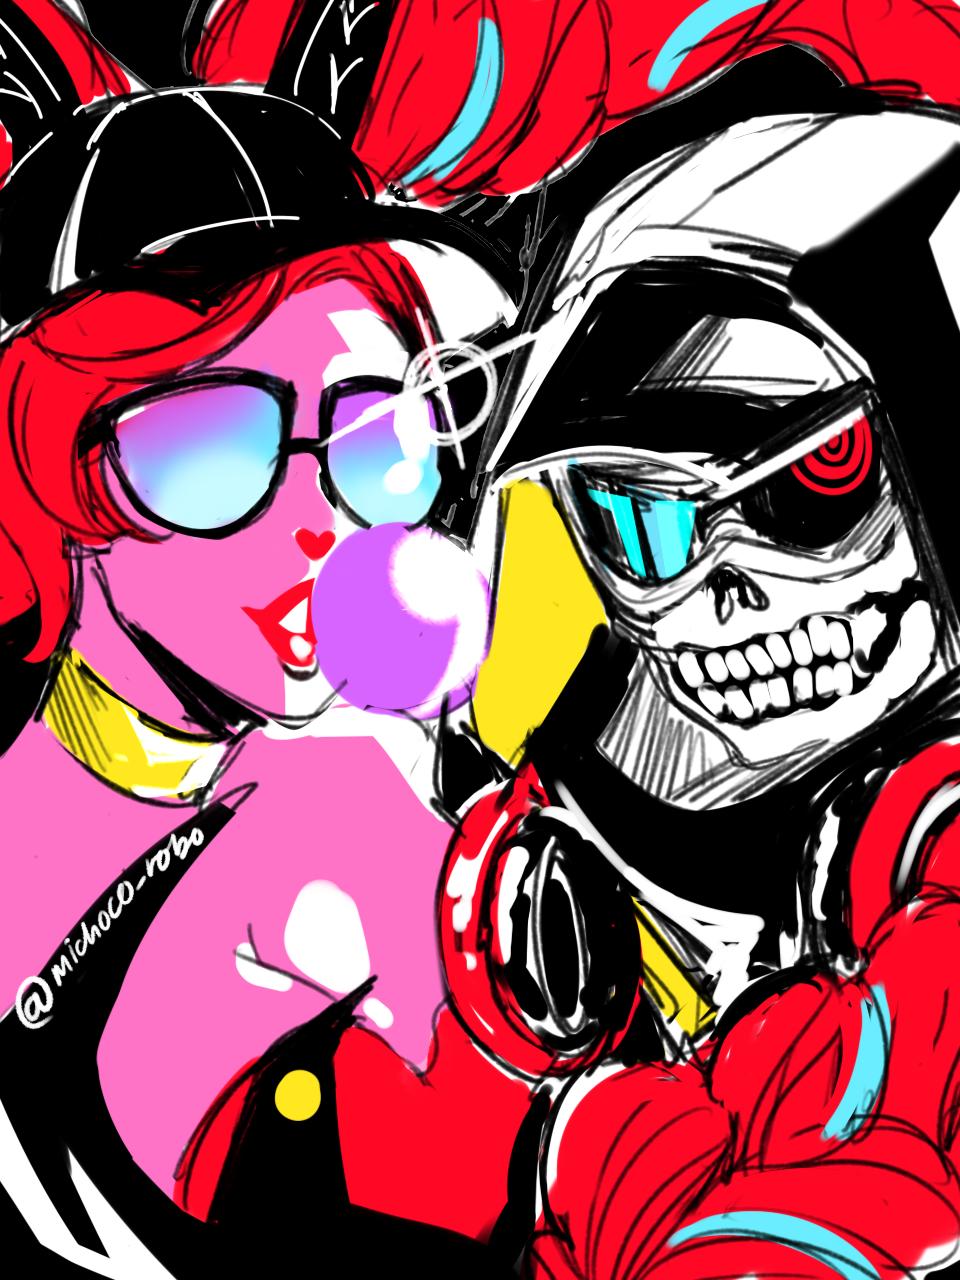 1boy 1girl baseball_cap bubble_blowing celestine_(persona_5) chewing_gum diffraction_spikes english_commentary goggles hat headphones headphones_around_neck highres hood hood_up lipstick looking_at_viewer makeup mich persona persona_5 persona_5_the_royal pink_skin red_hair red_lipstick sunglasses twitter_username william_(persona_5)